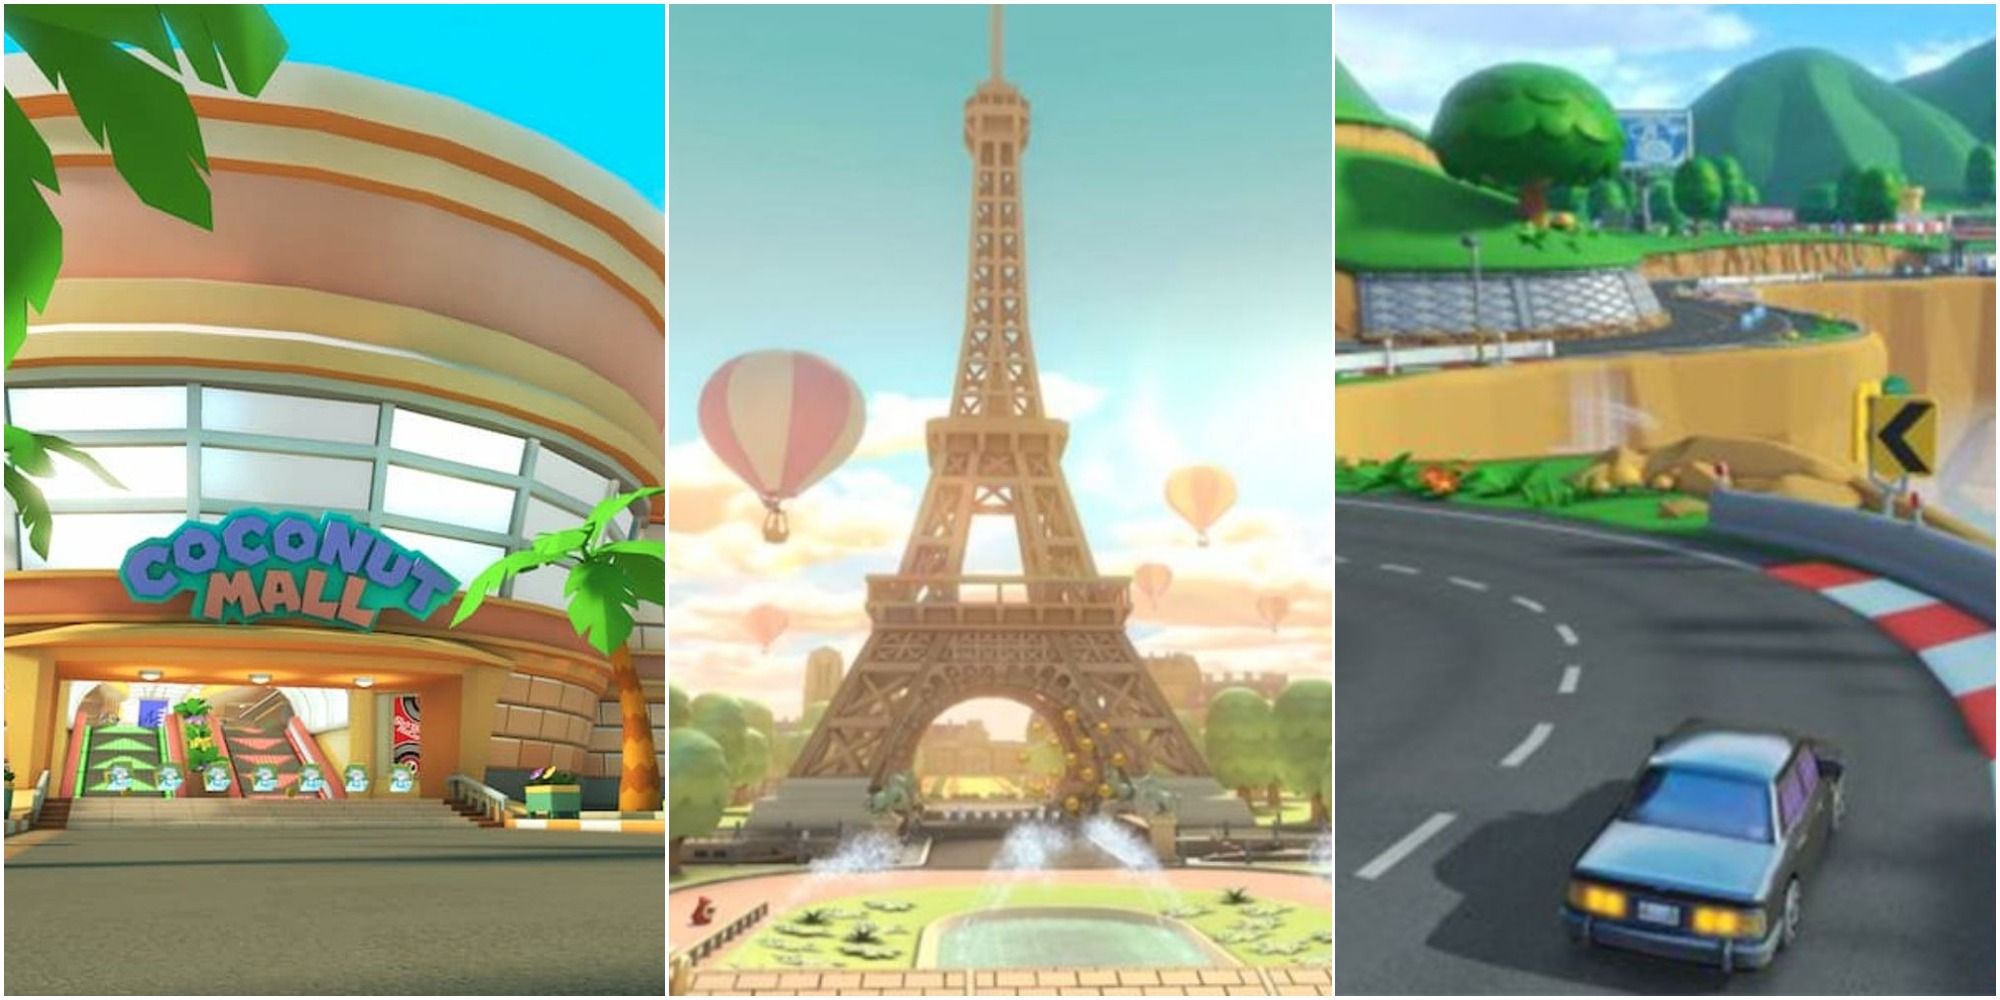 on the left is coconut mall, in the middle is Paris Promenade and on the right is Shroom Ridge